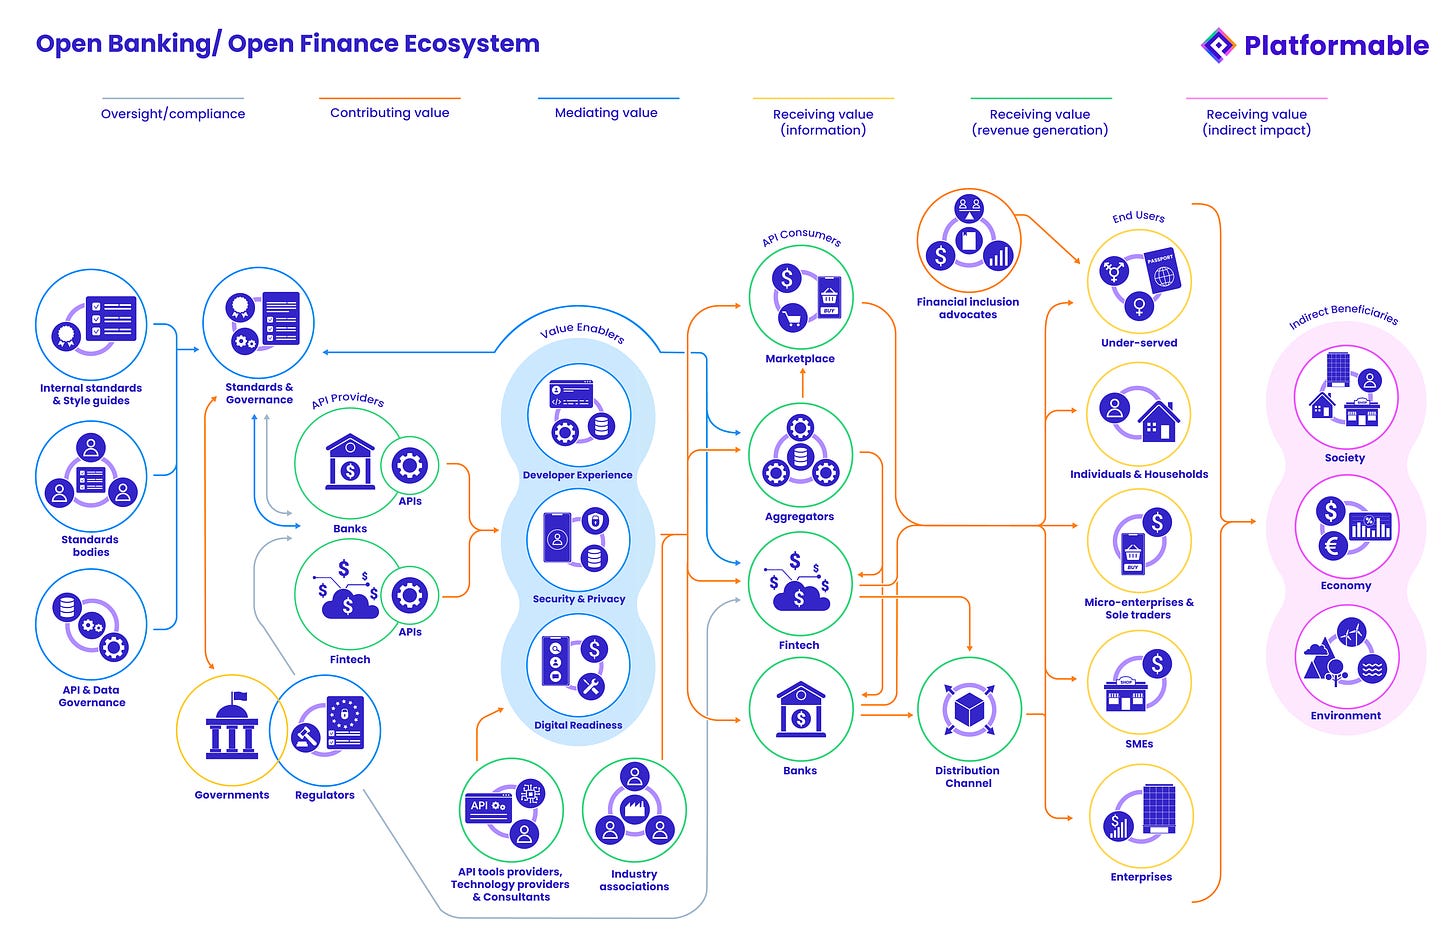 Model by Platformable on how value is generated and flows through an open banking ecosystem